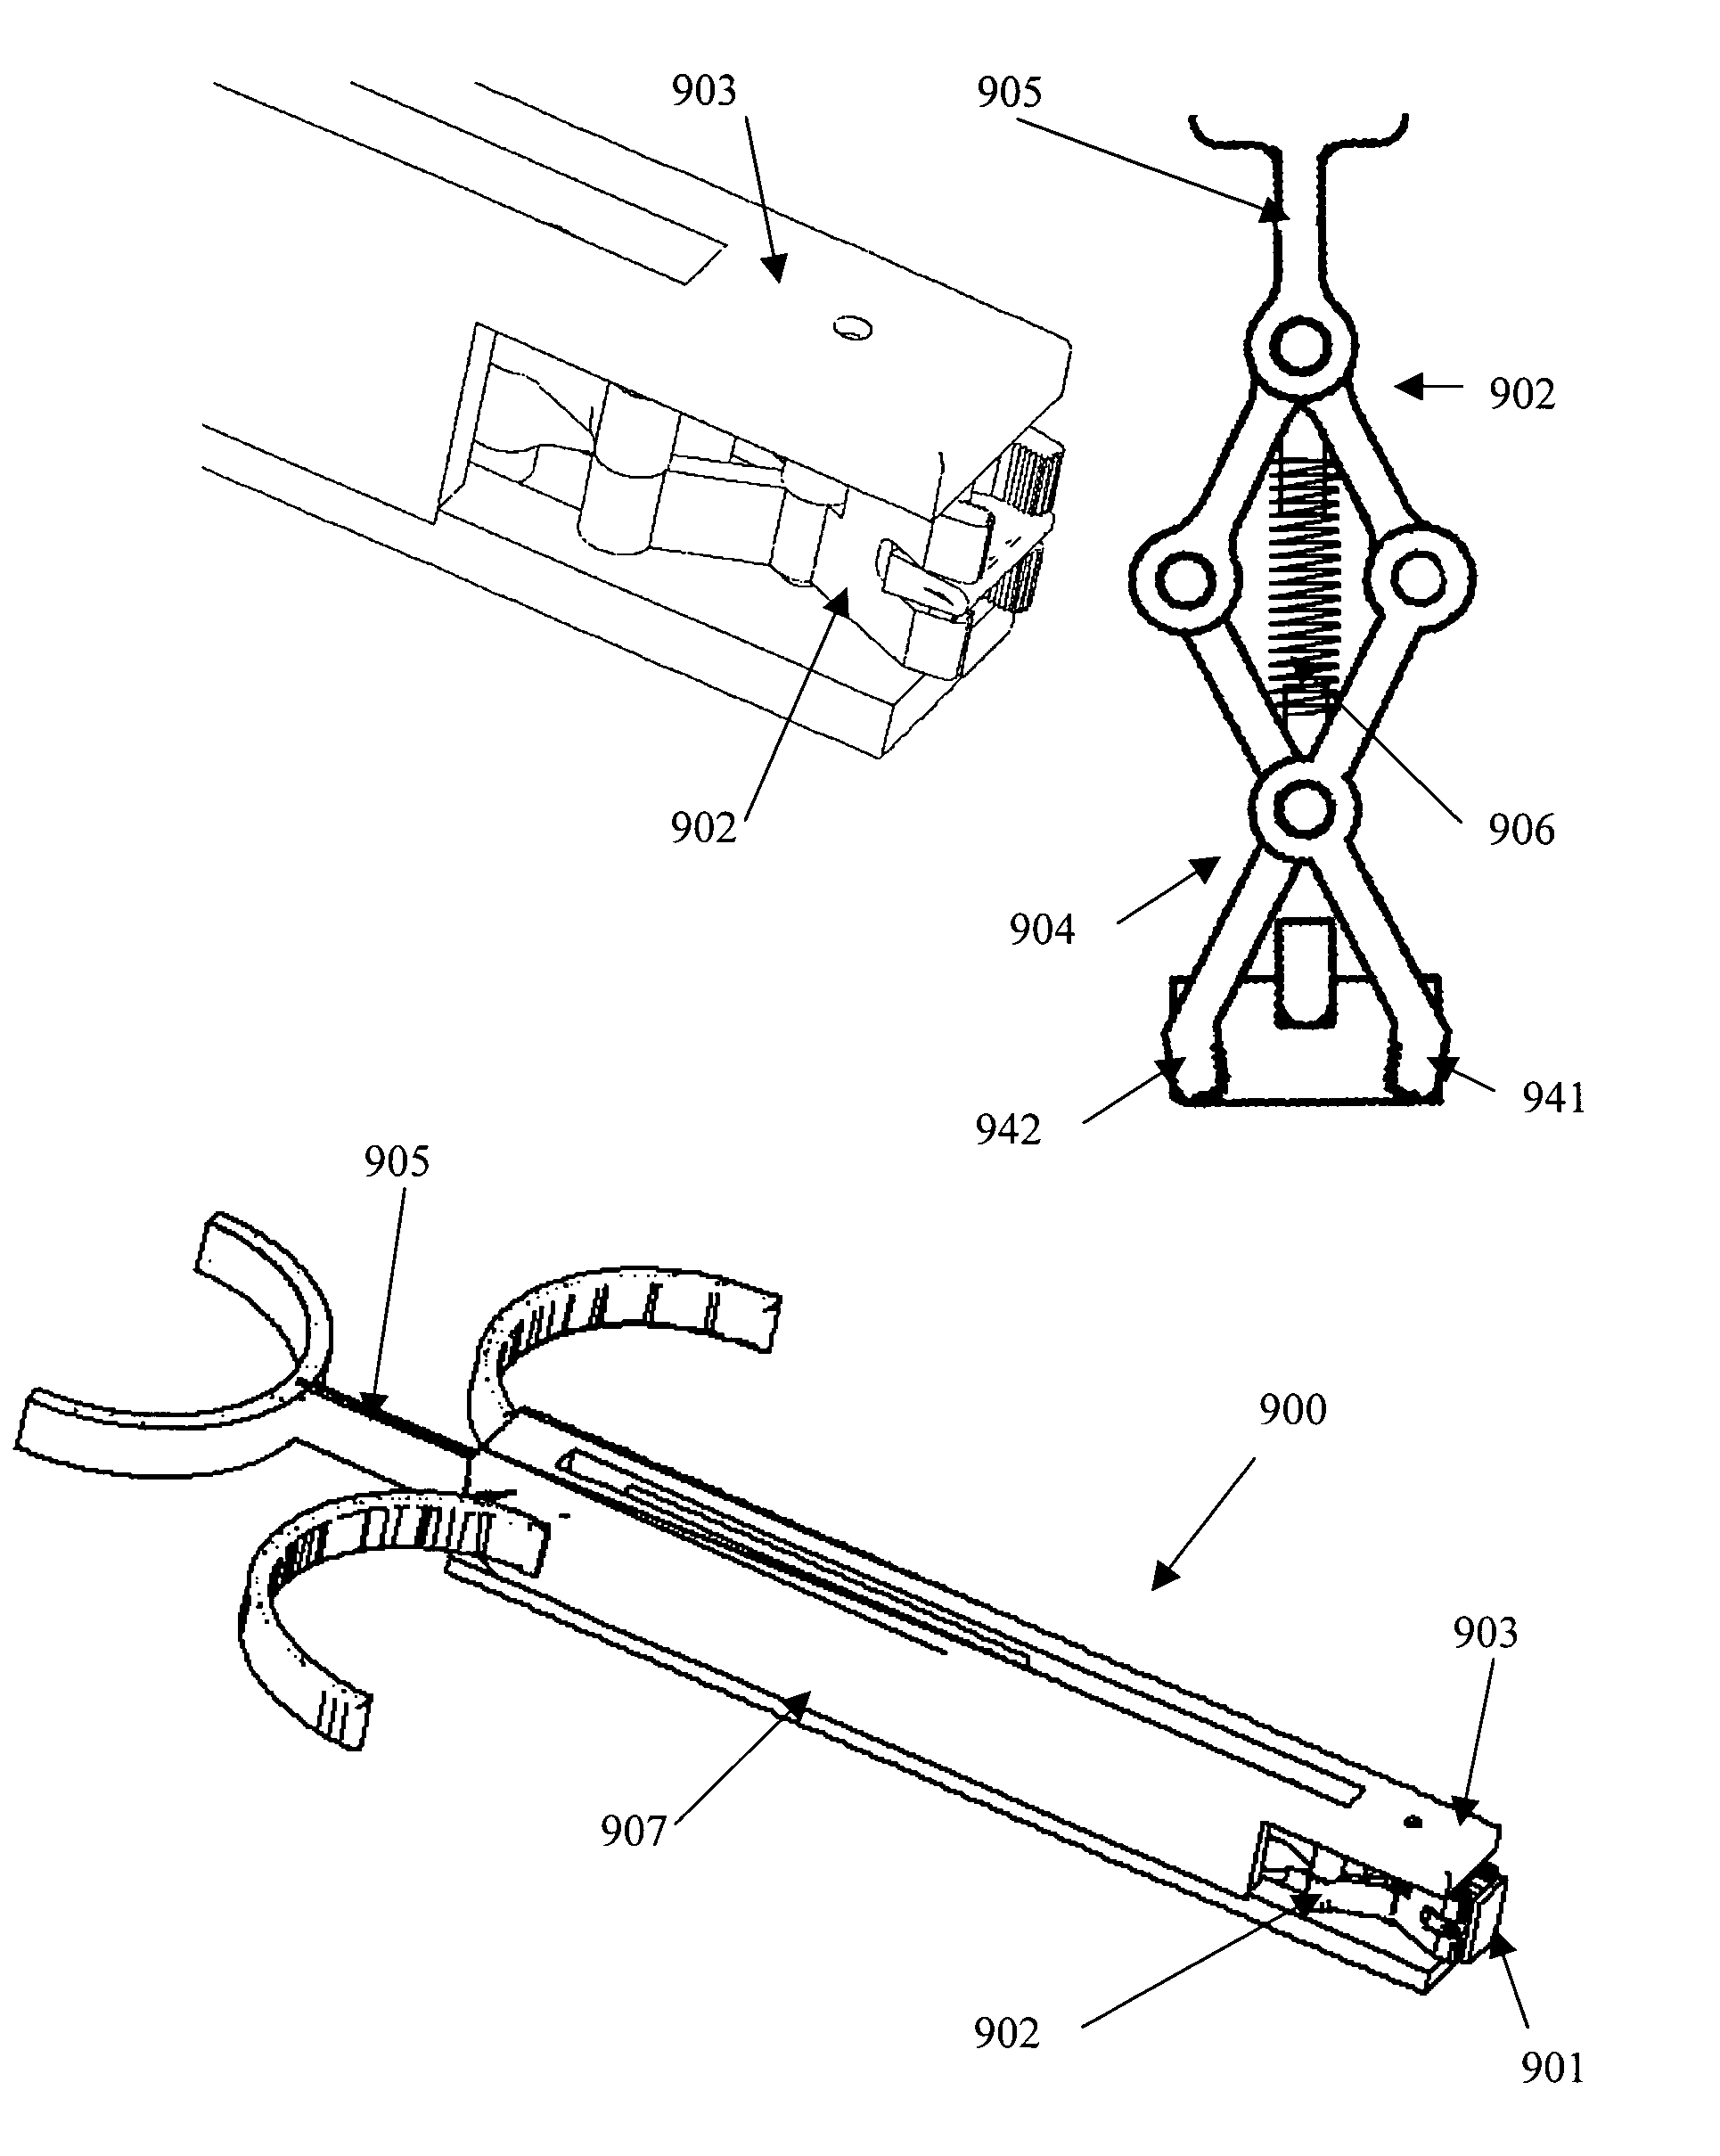 Device for positioning at least one orthodontic element